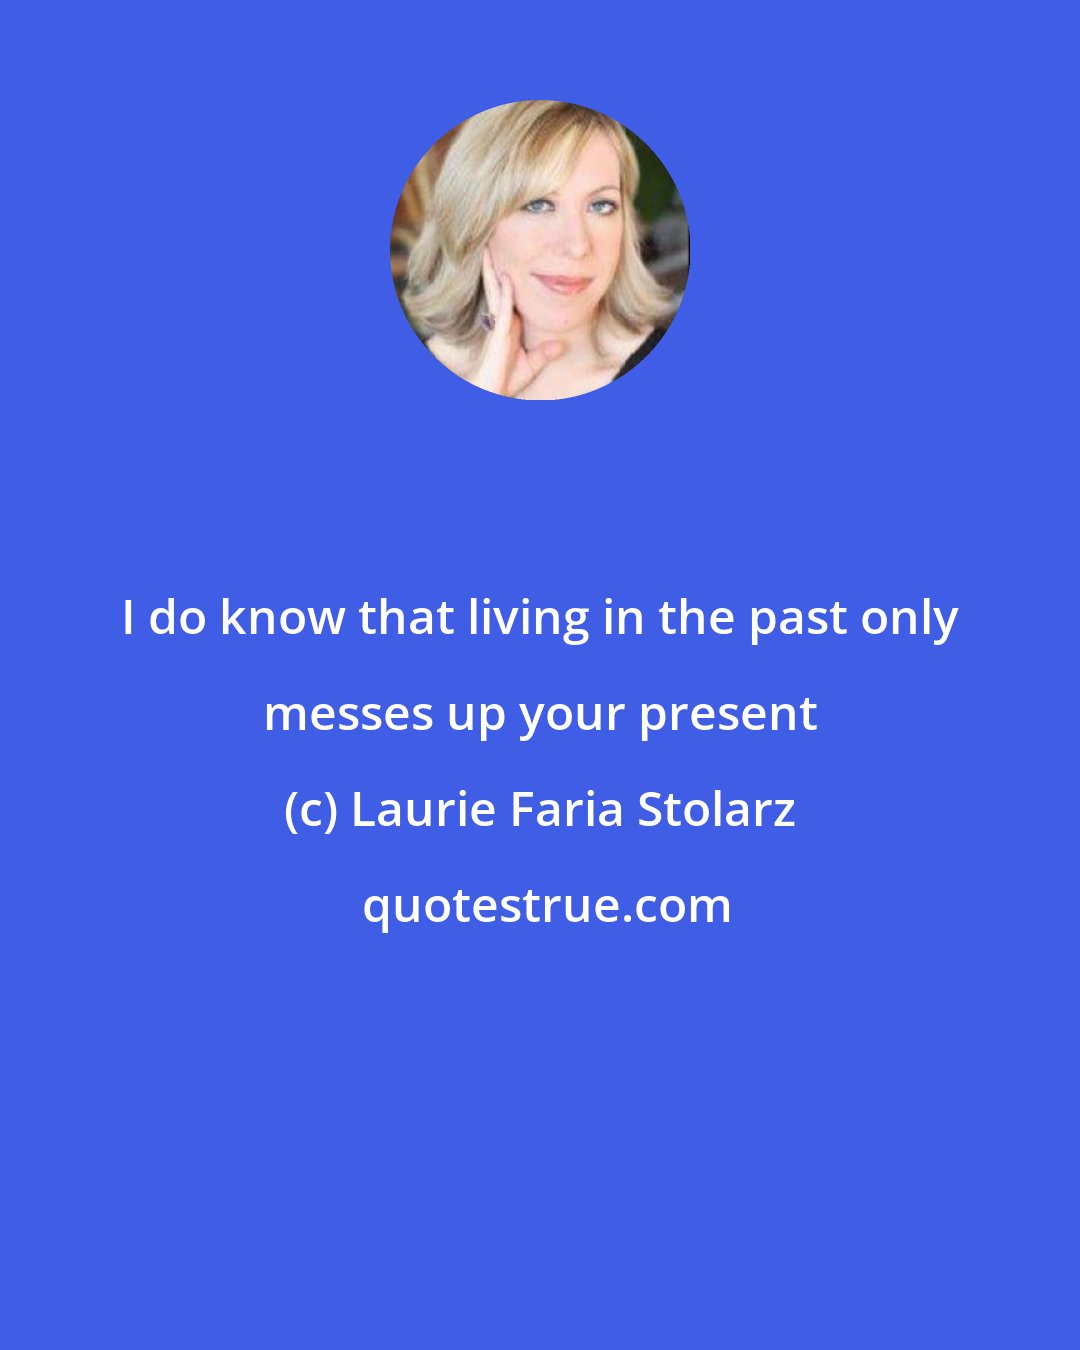 Laurie Faria Stolarz: I do know that living in the past only messes up your present